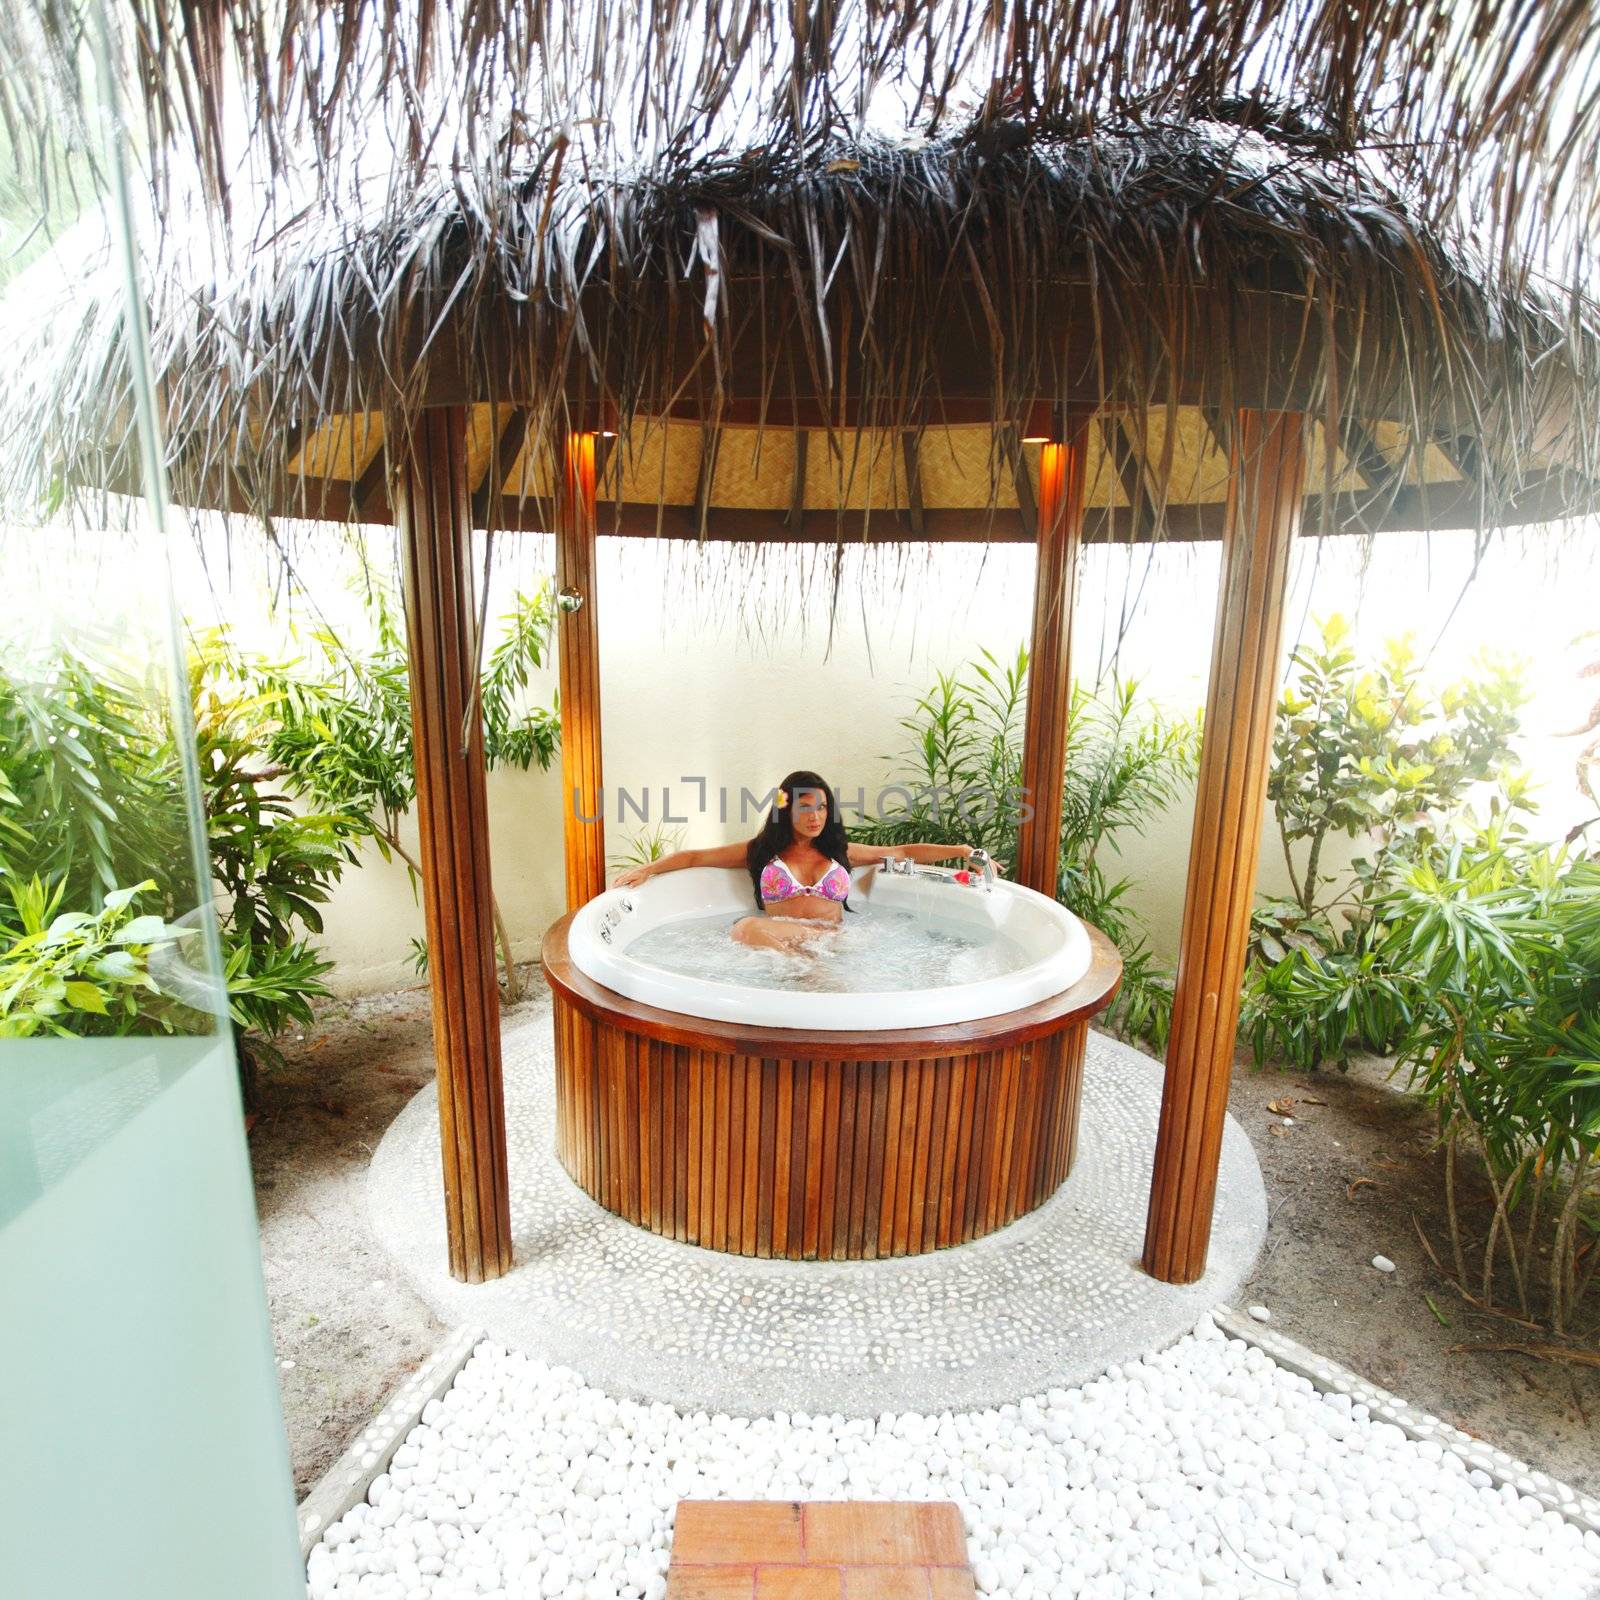 Pretty woman relaxing in jacuzzi of tropical hotel